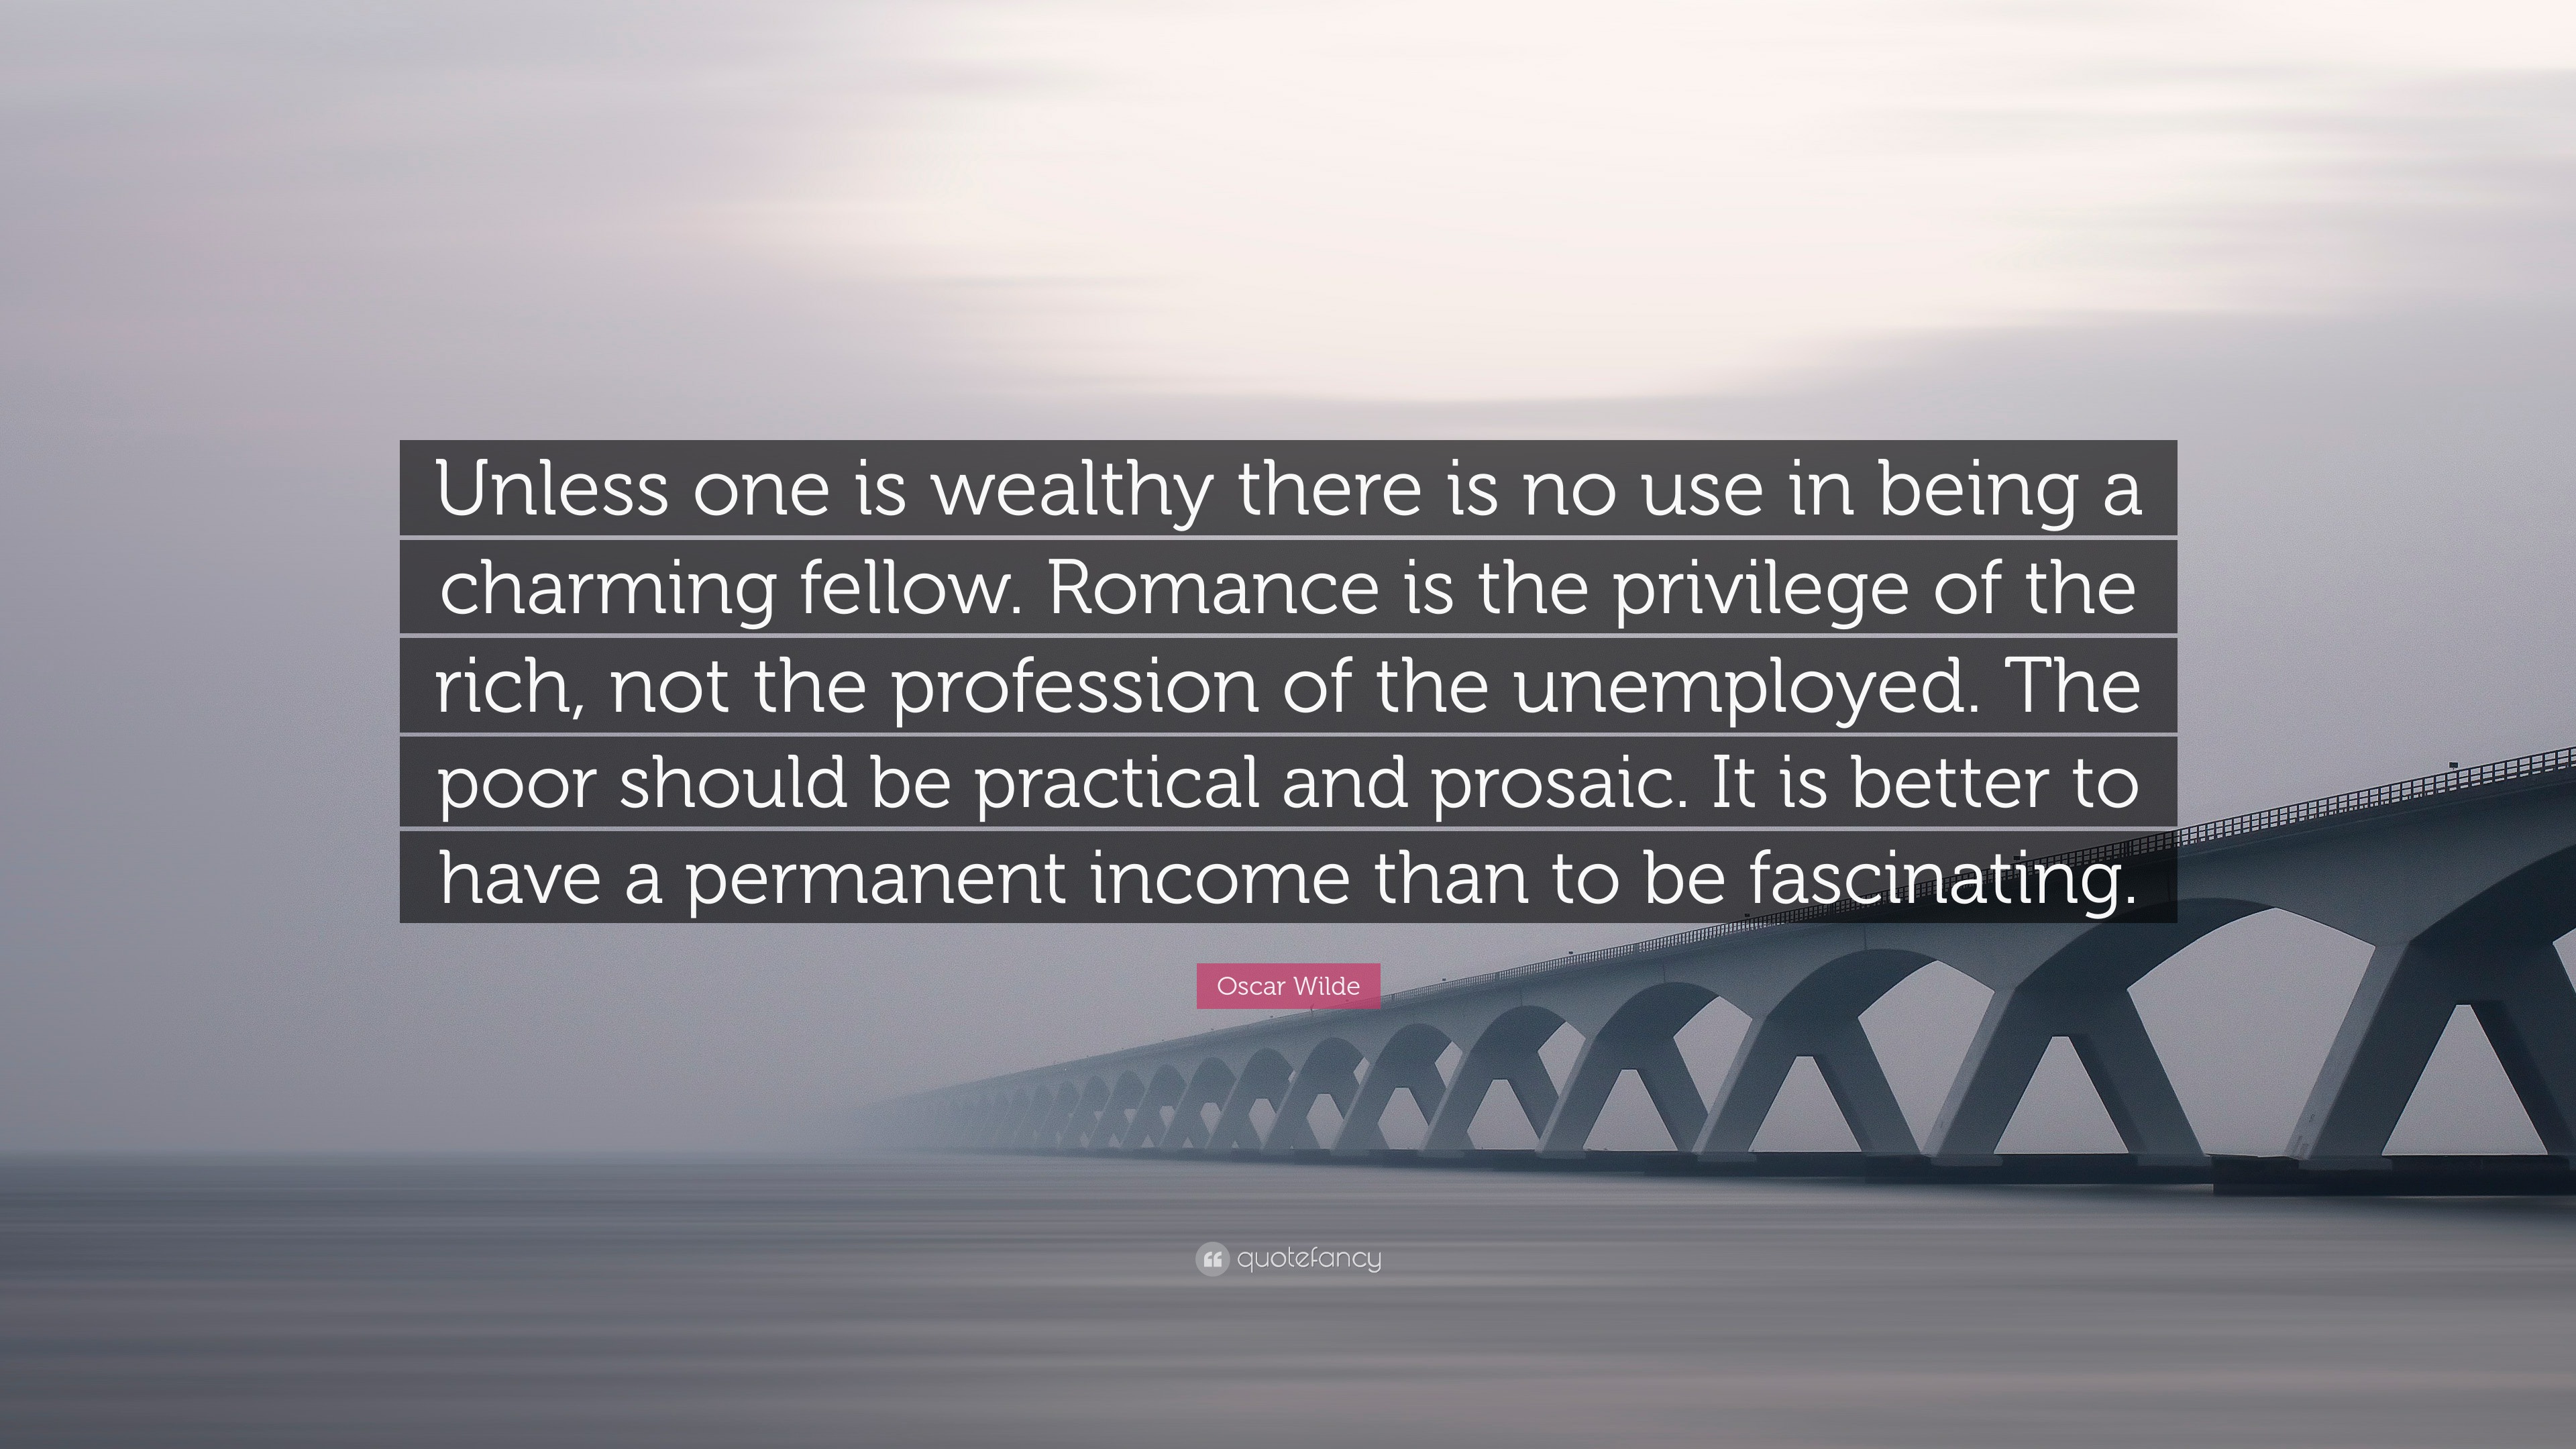 Oscar Wilde Quote: “Unless one is wealthy there is no use in being a  charming fellow. Romance is the privilege of the rich, not the professi...”